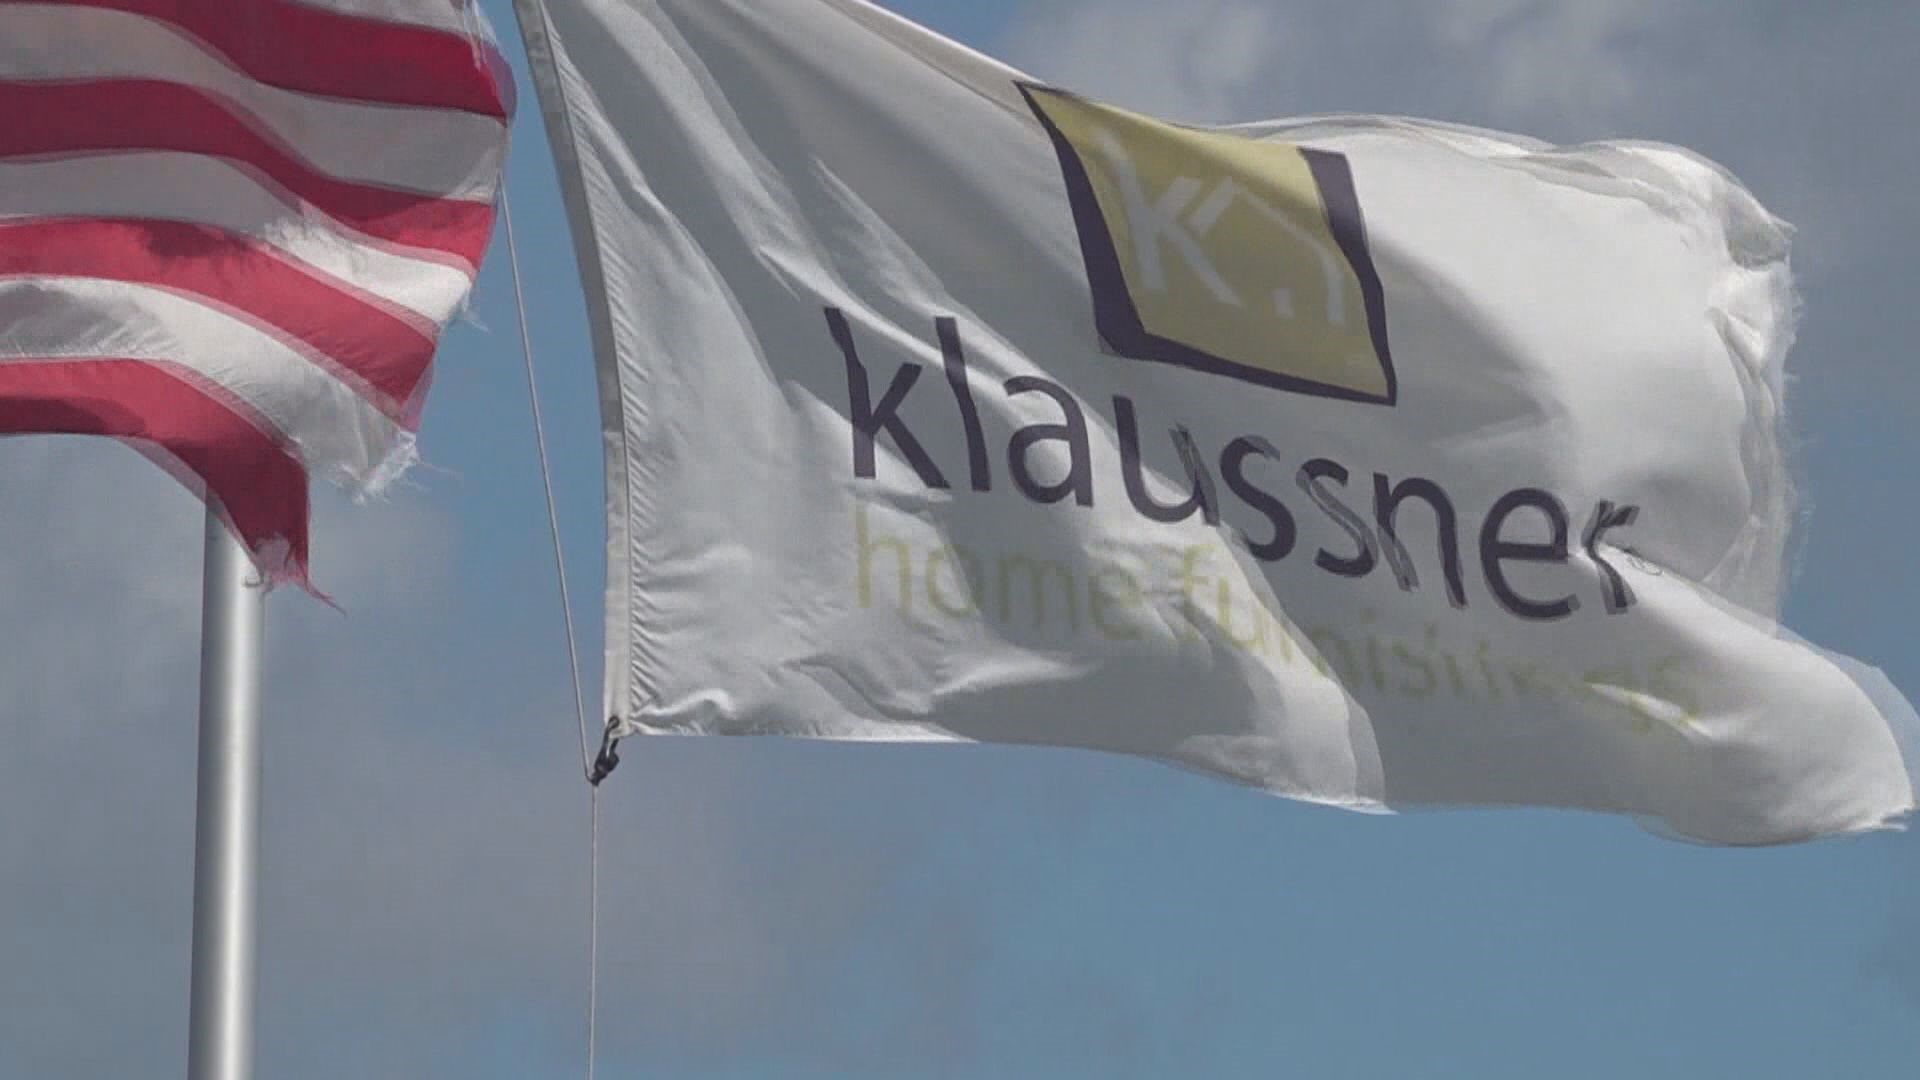 VPC Group, a company that specializes in making foam for furniture, is interested in buying part of Klaussner Furniture after the company closed back in August.